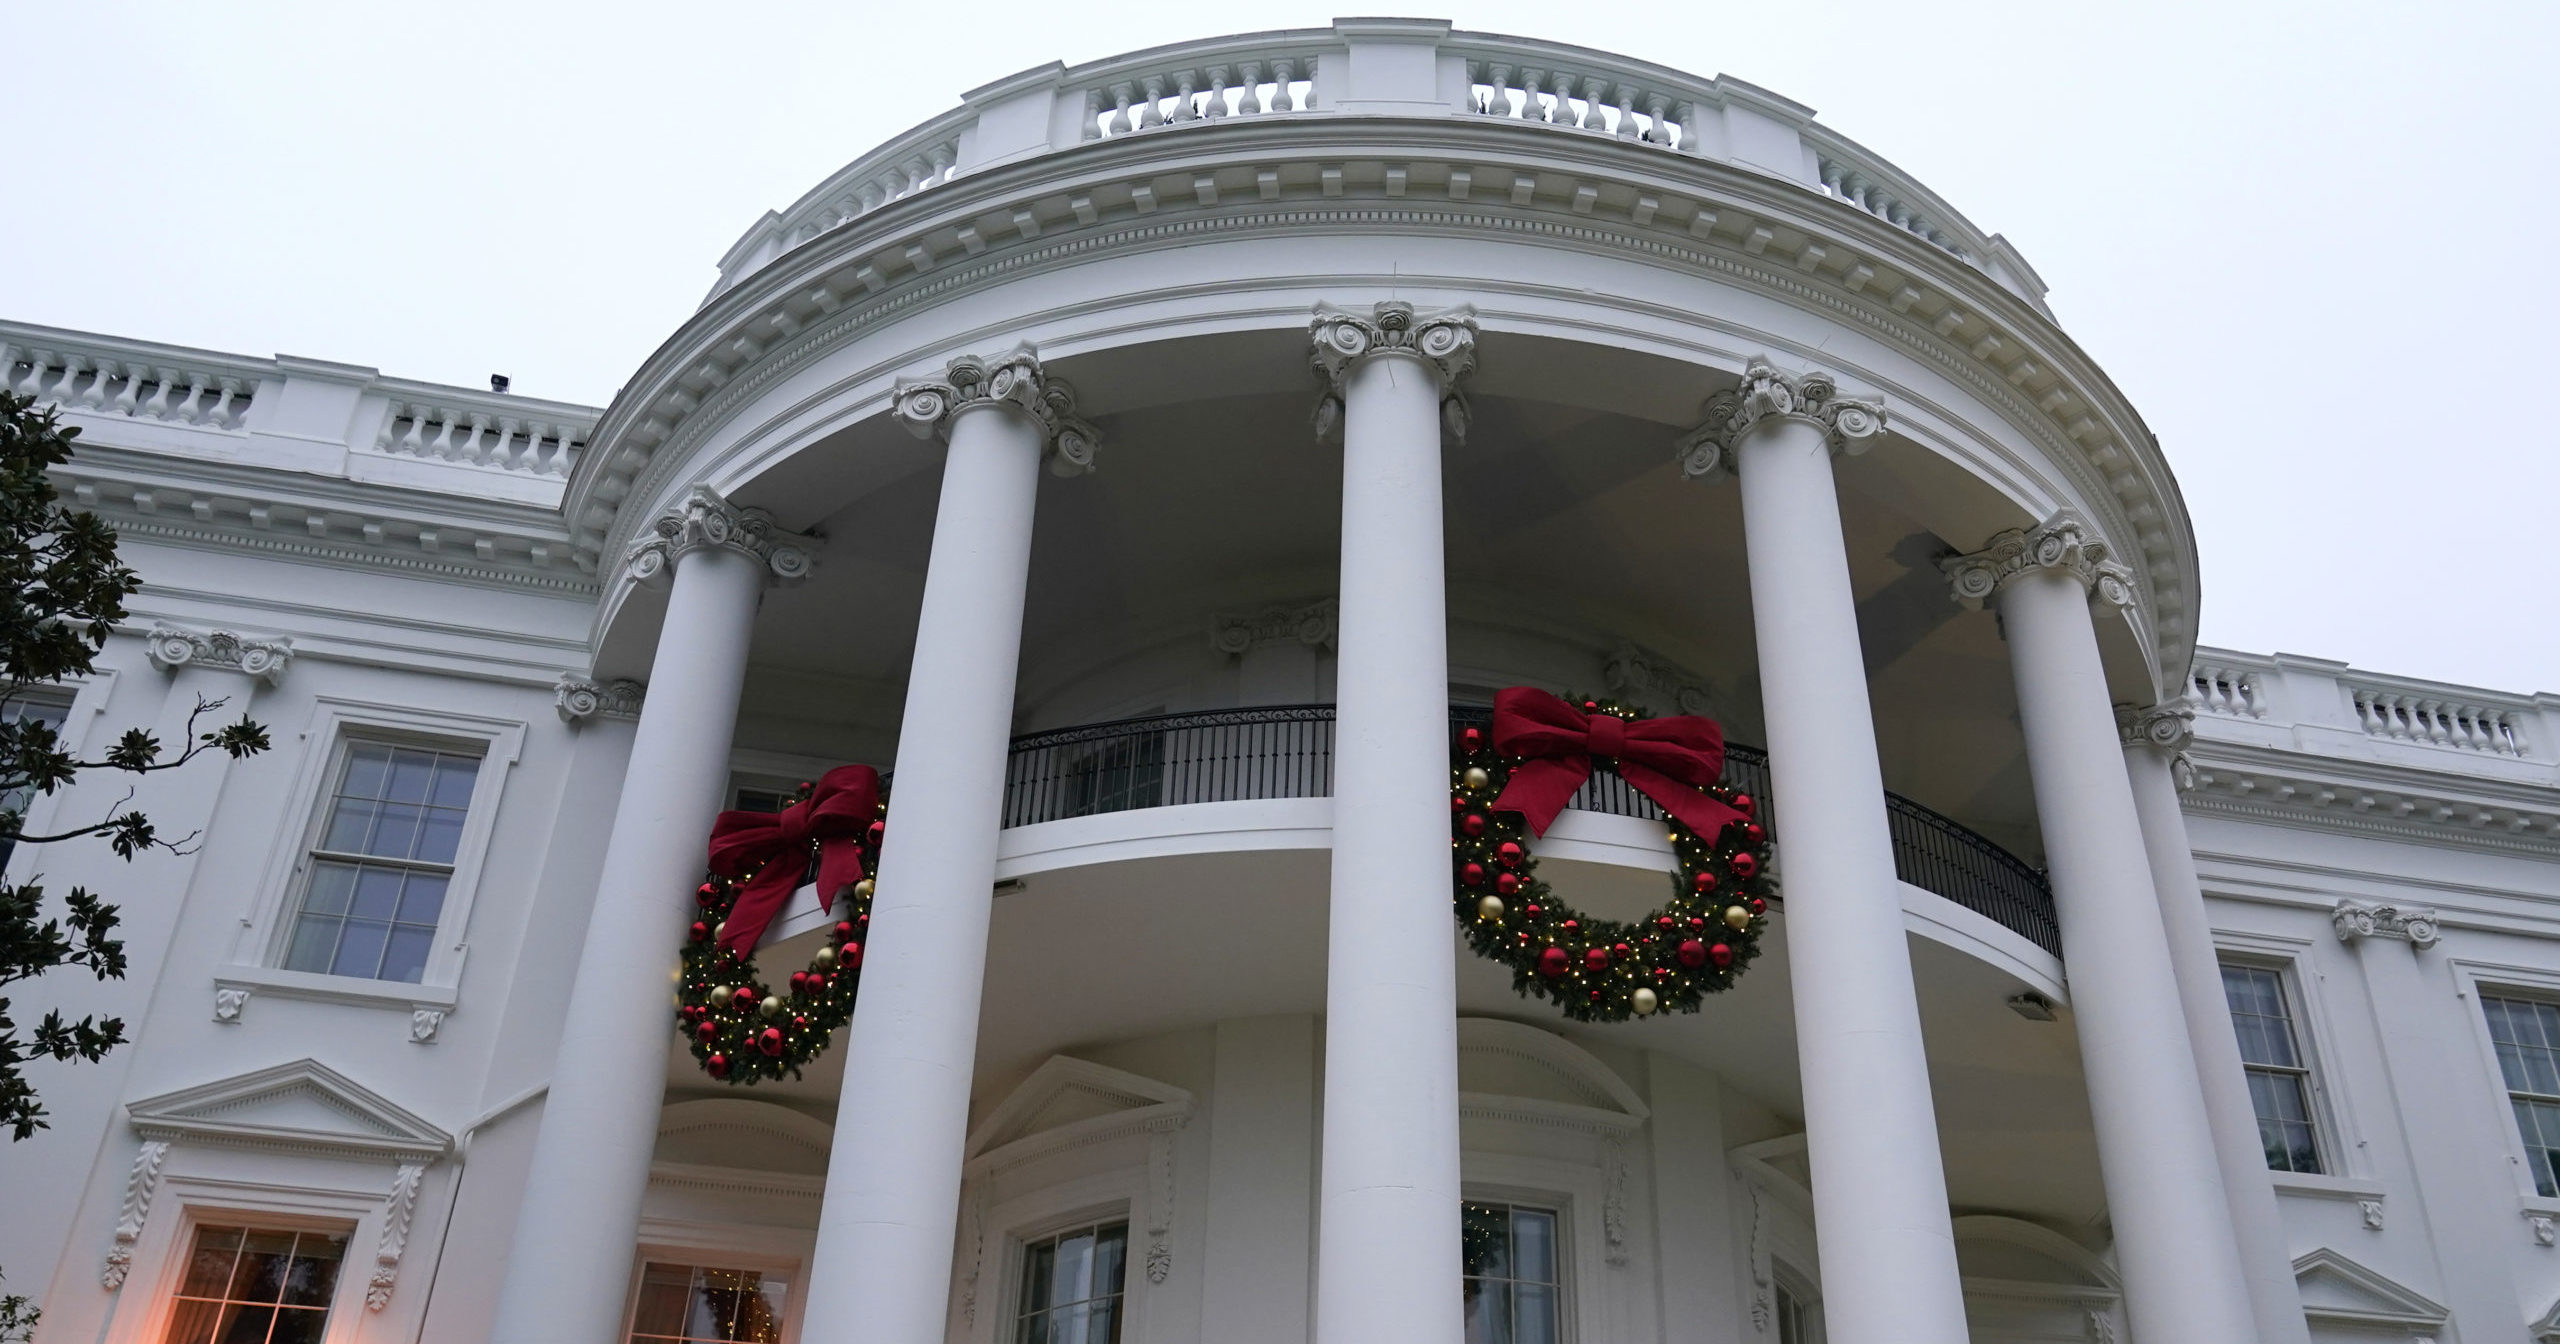 Wreaths hang on the Truman Balcony of the White House in Washington, D.C., on Sunday.